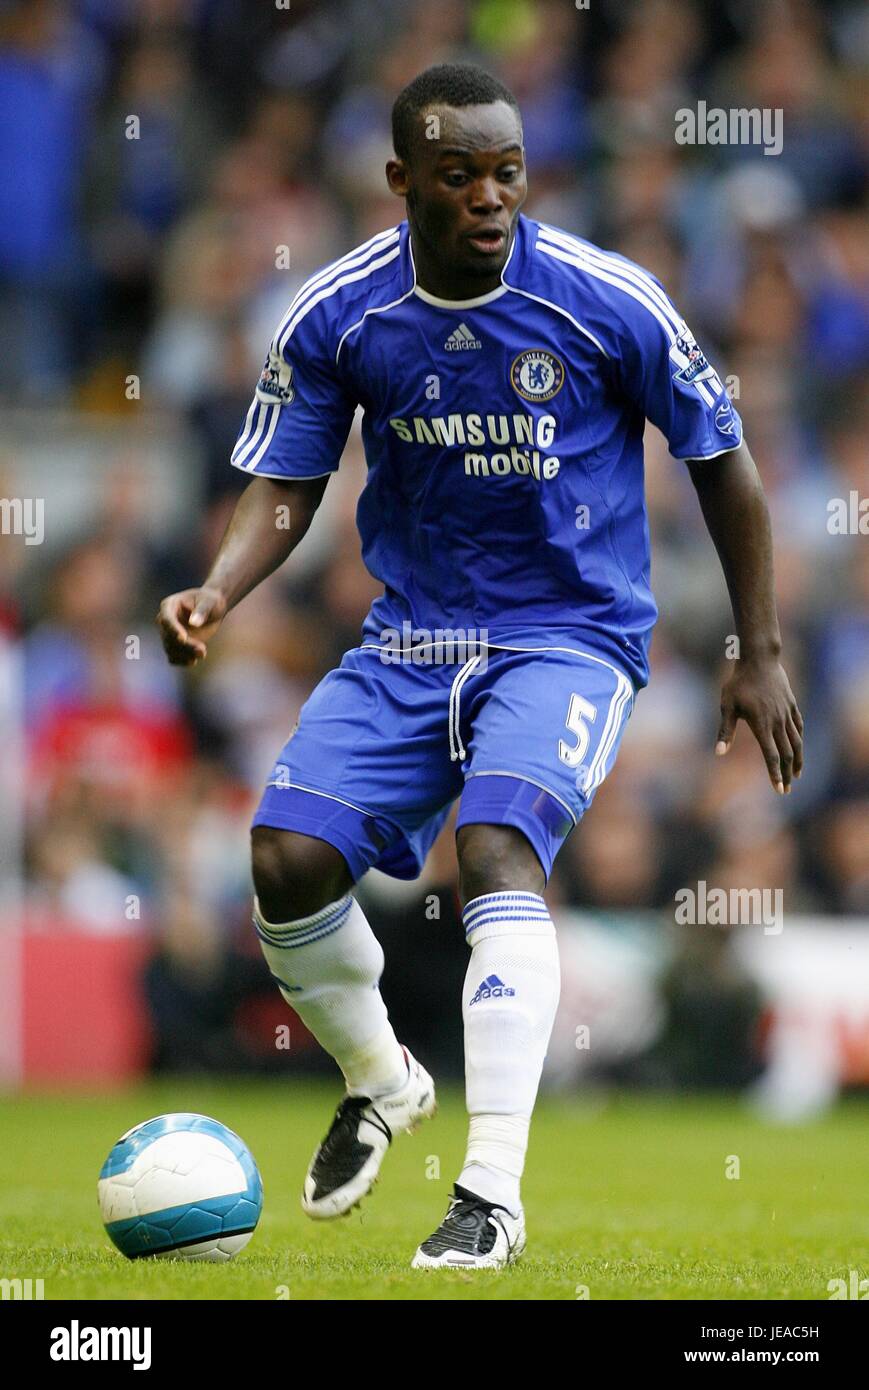 MICHAEL ESSIEN CHELSEA FC ANFIELD LIVERPOOL ENGLAND 19 August 2007 Stock Photo